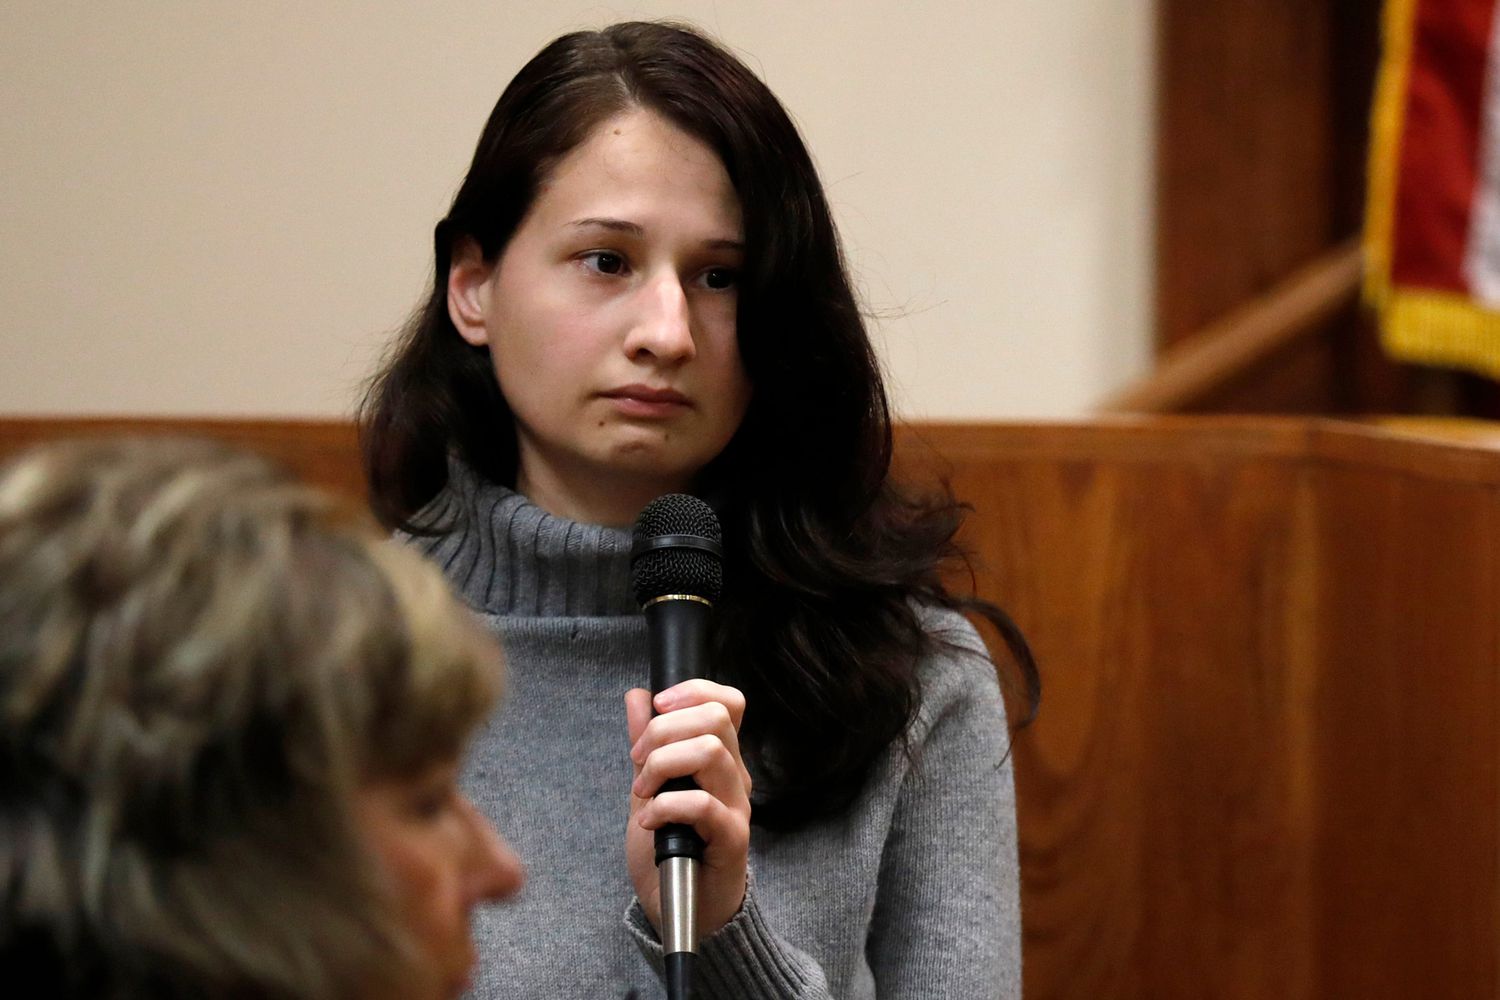 Gypsy Rose Blanchard Reveals Shocking Details About Solitary Confinement Experience